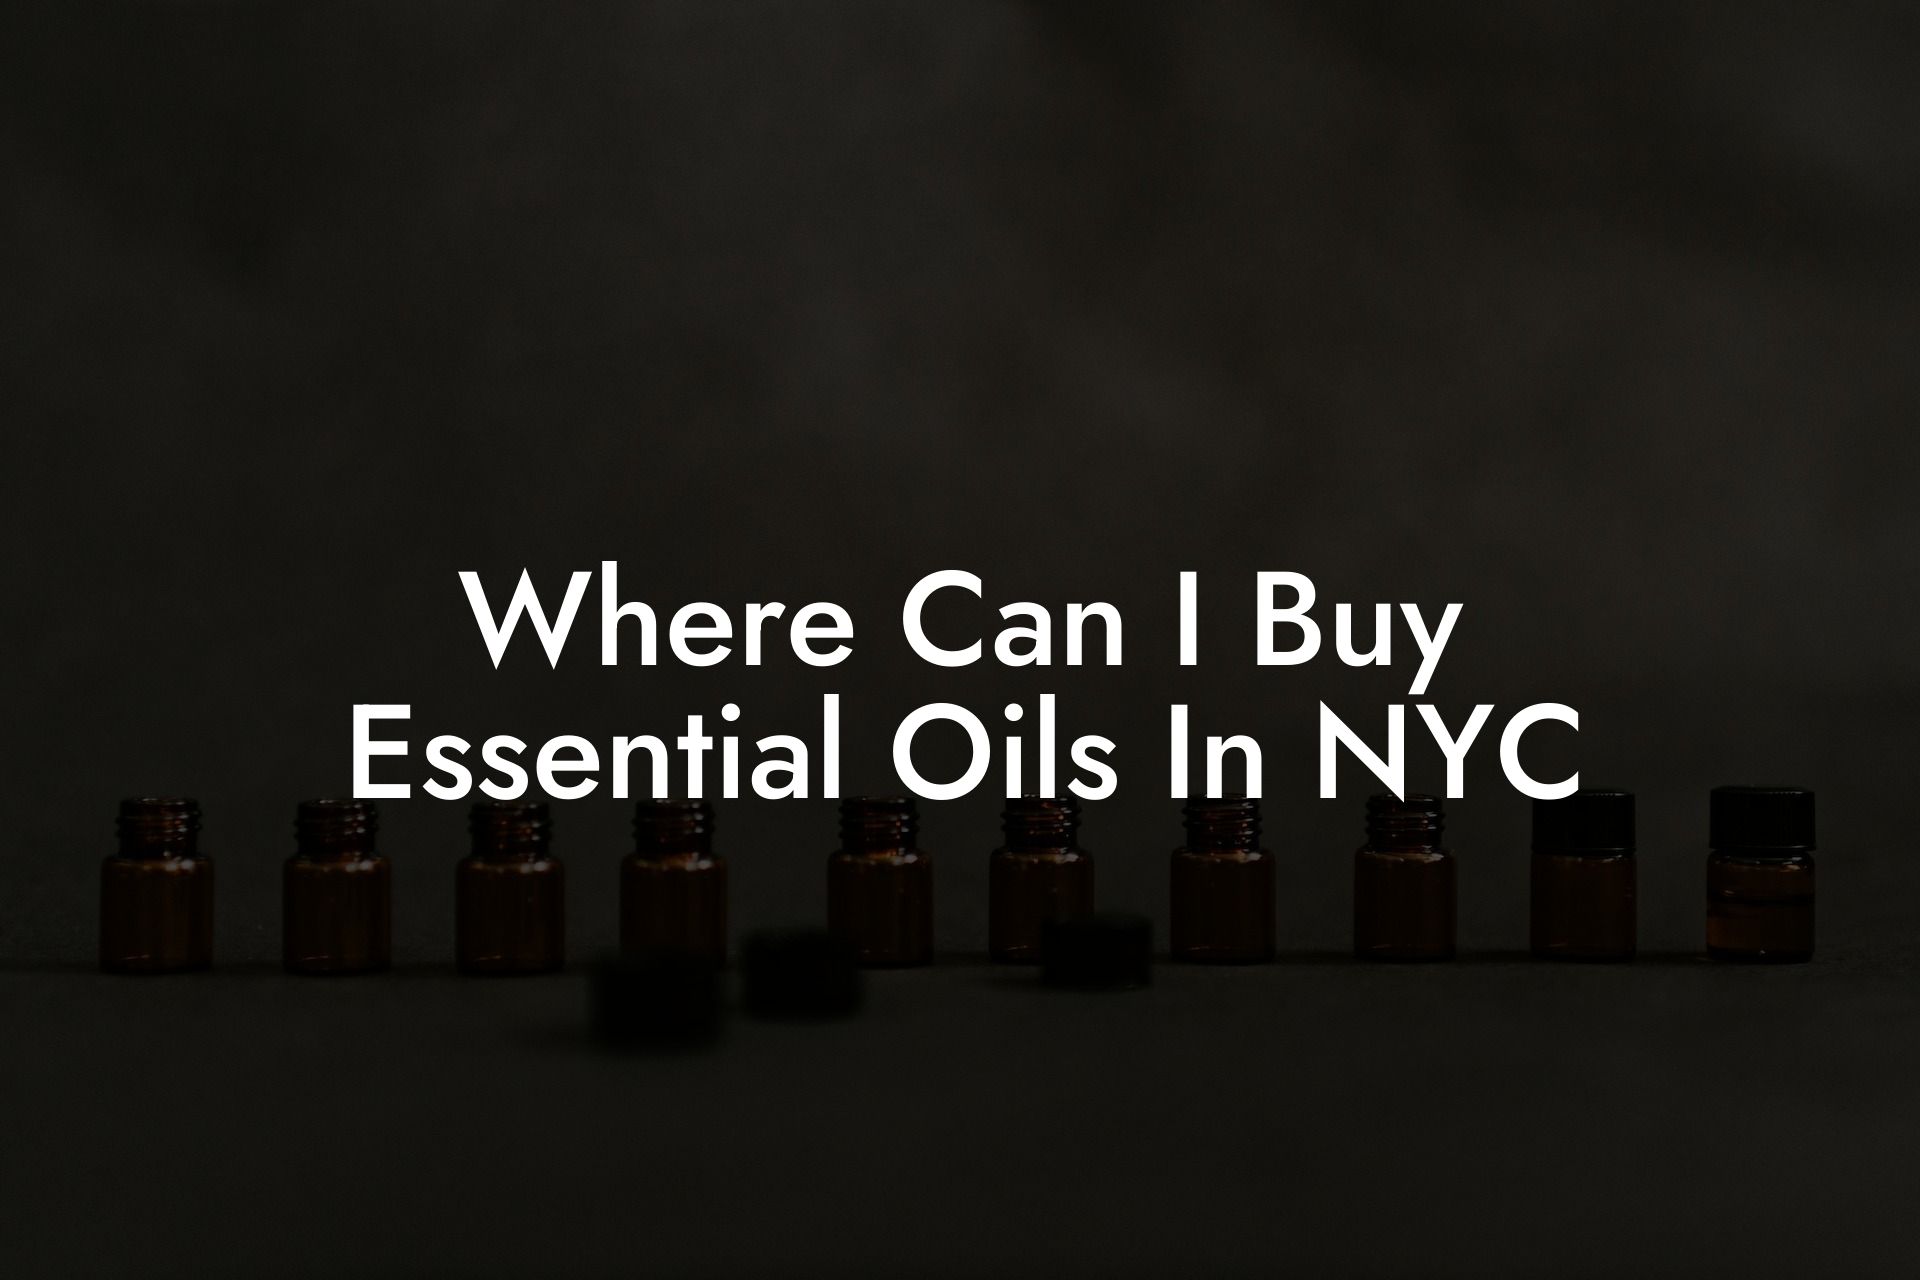 Where Can I Buy Essential Oils In NYC